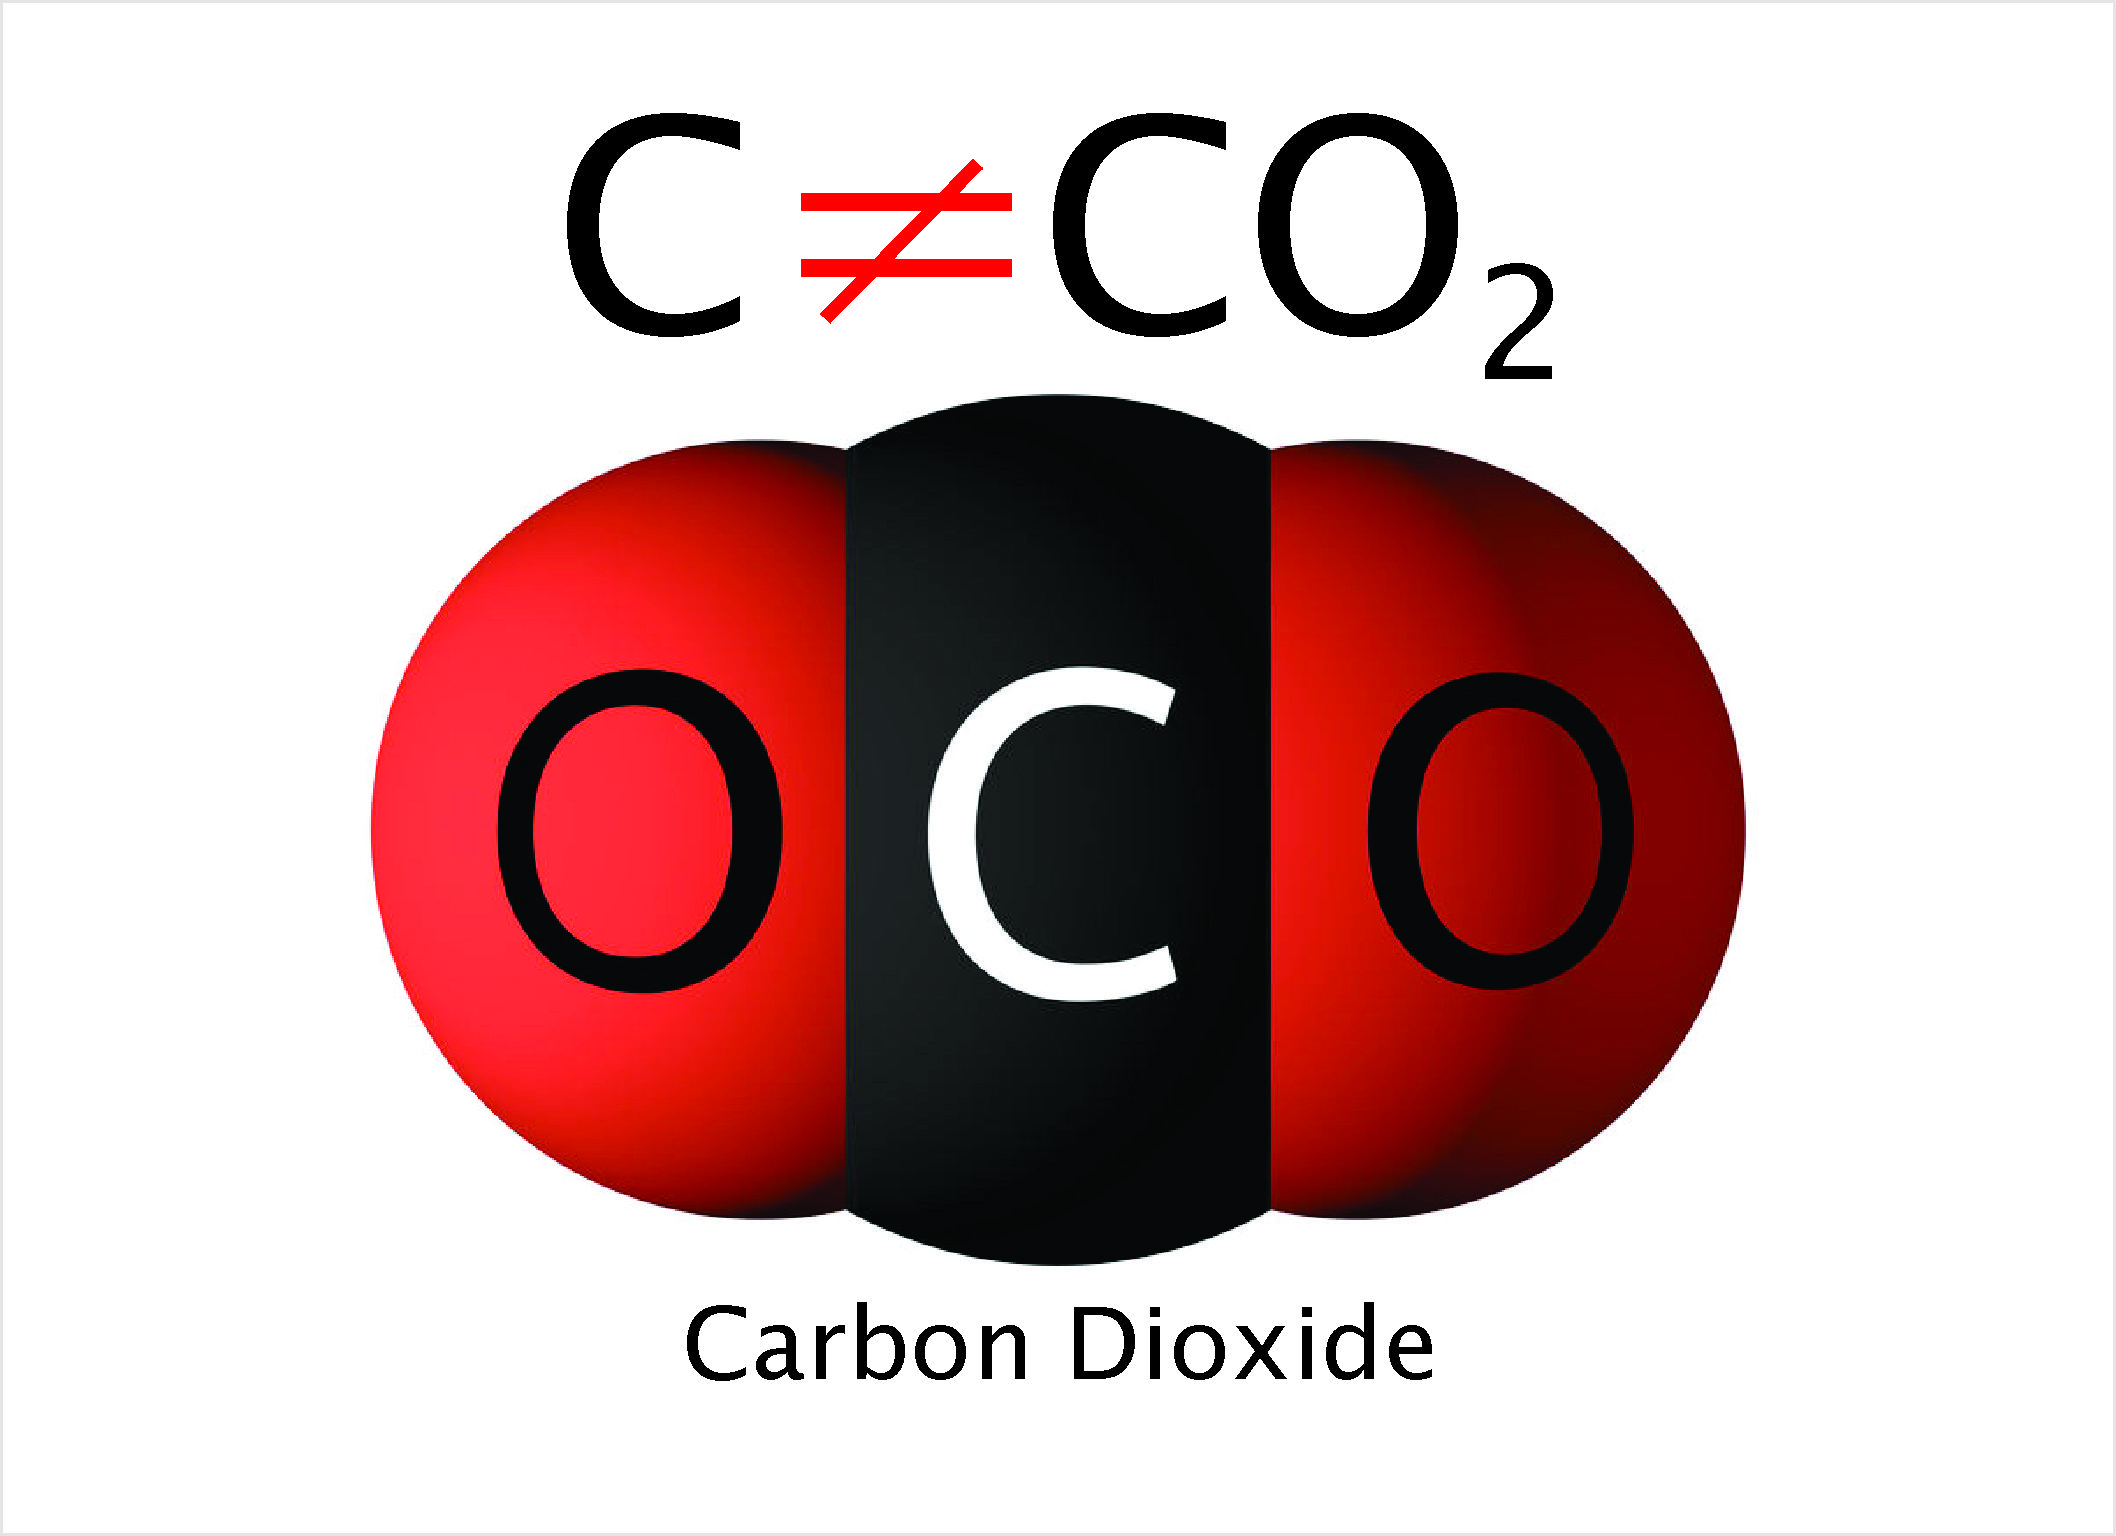 Carbon is not a synonym for Carbon Dioxide